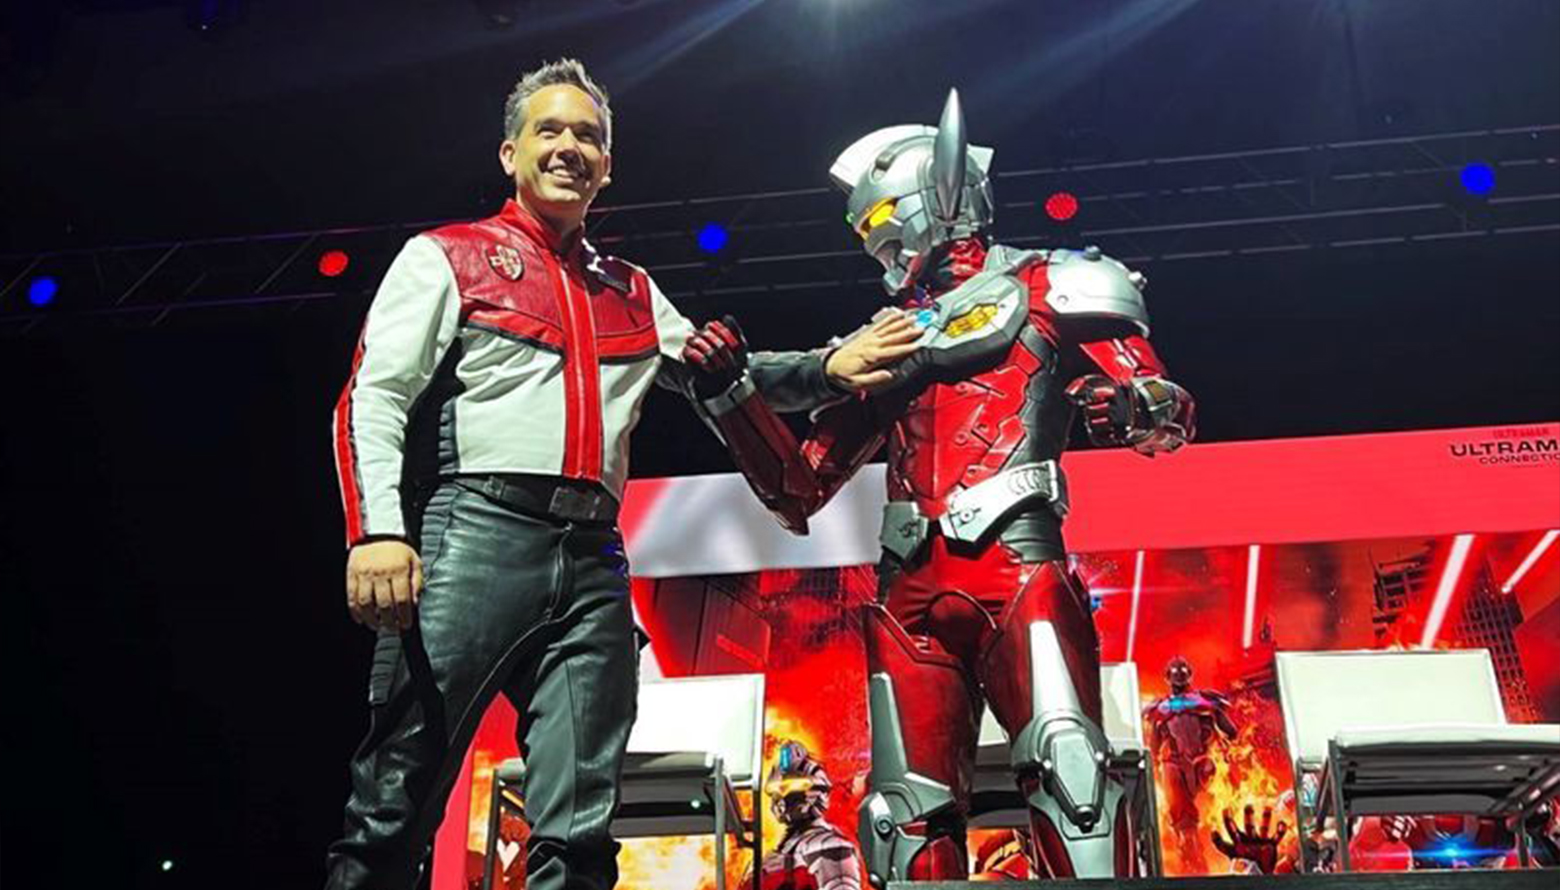 ULTRAMAN RISES TO NEW HEIGHTS AT ANIME EXPO’S SUPER ULTRAMAN EXTRAVAGANZA